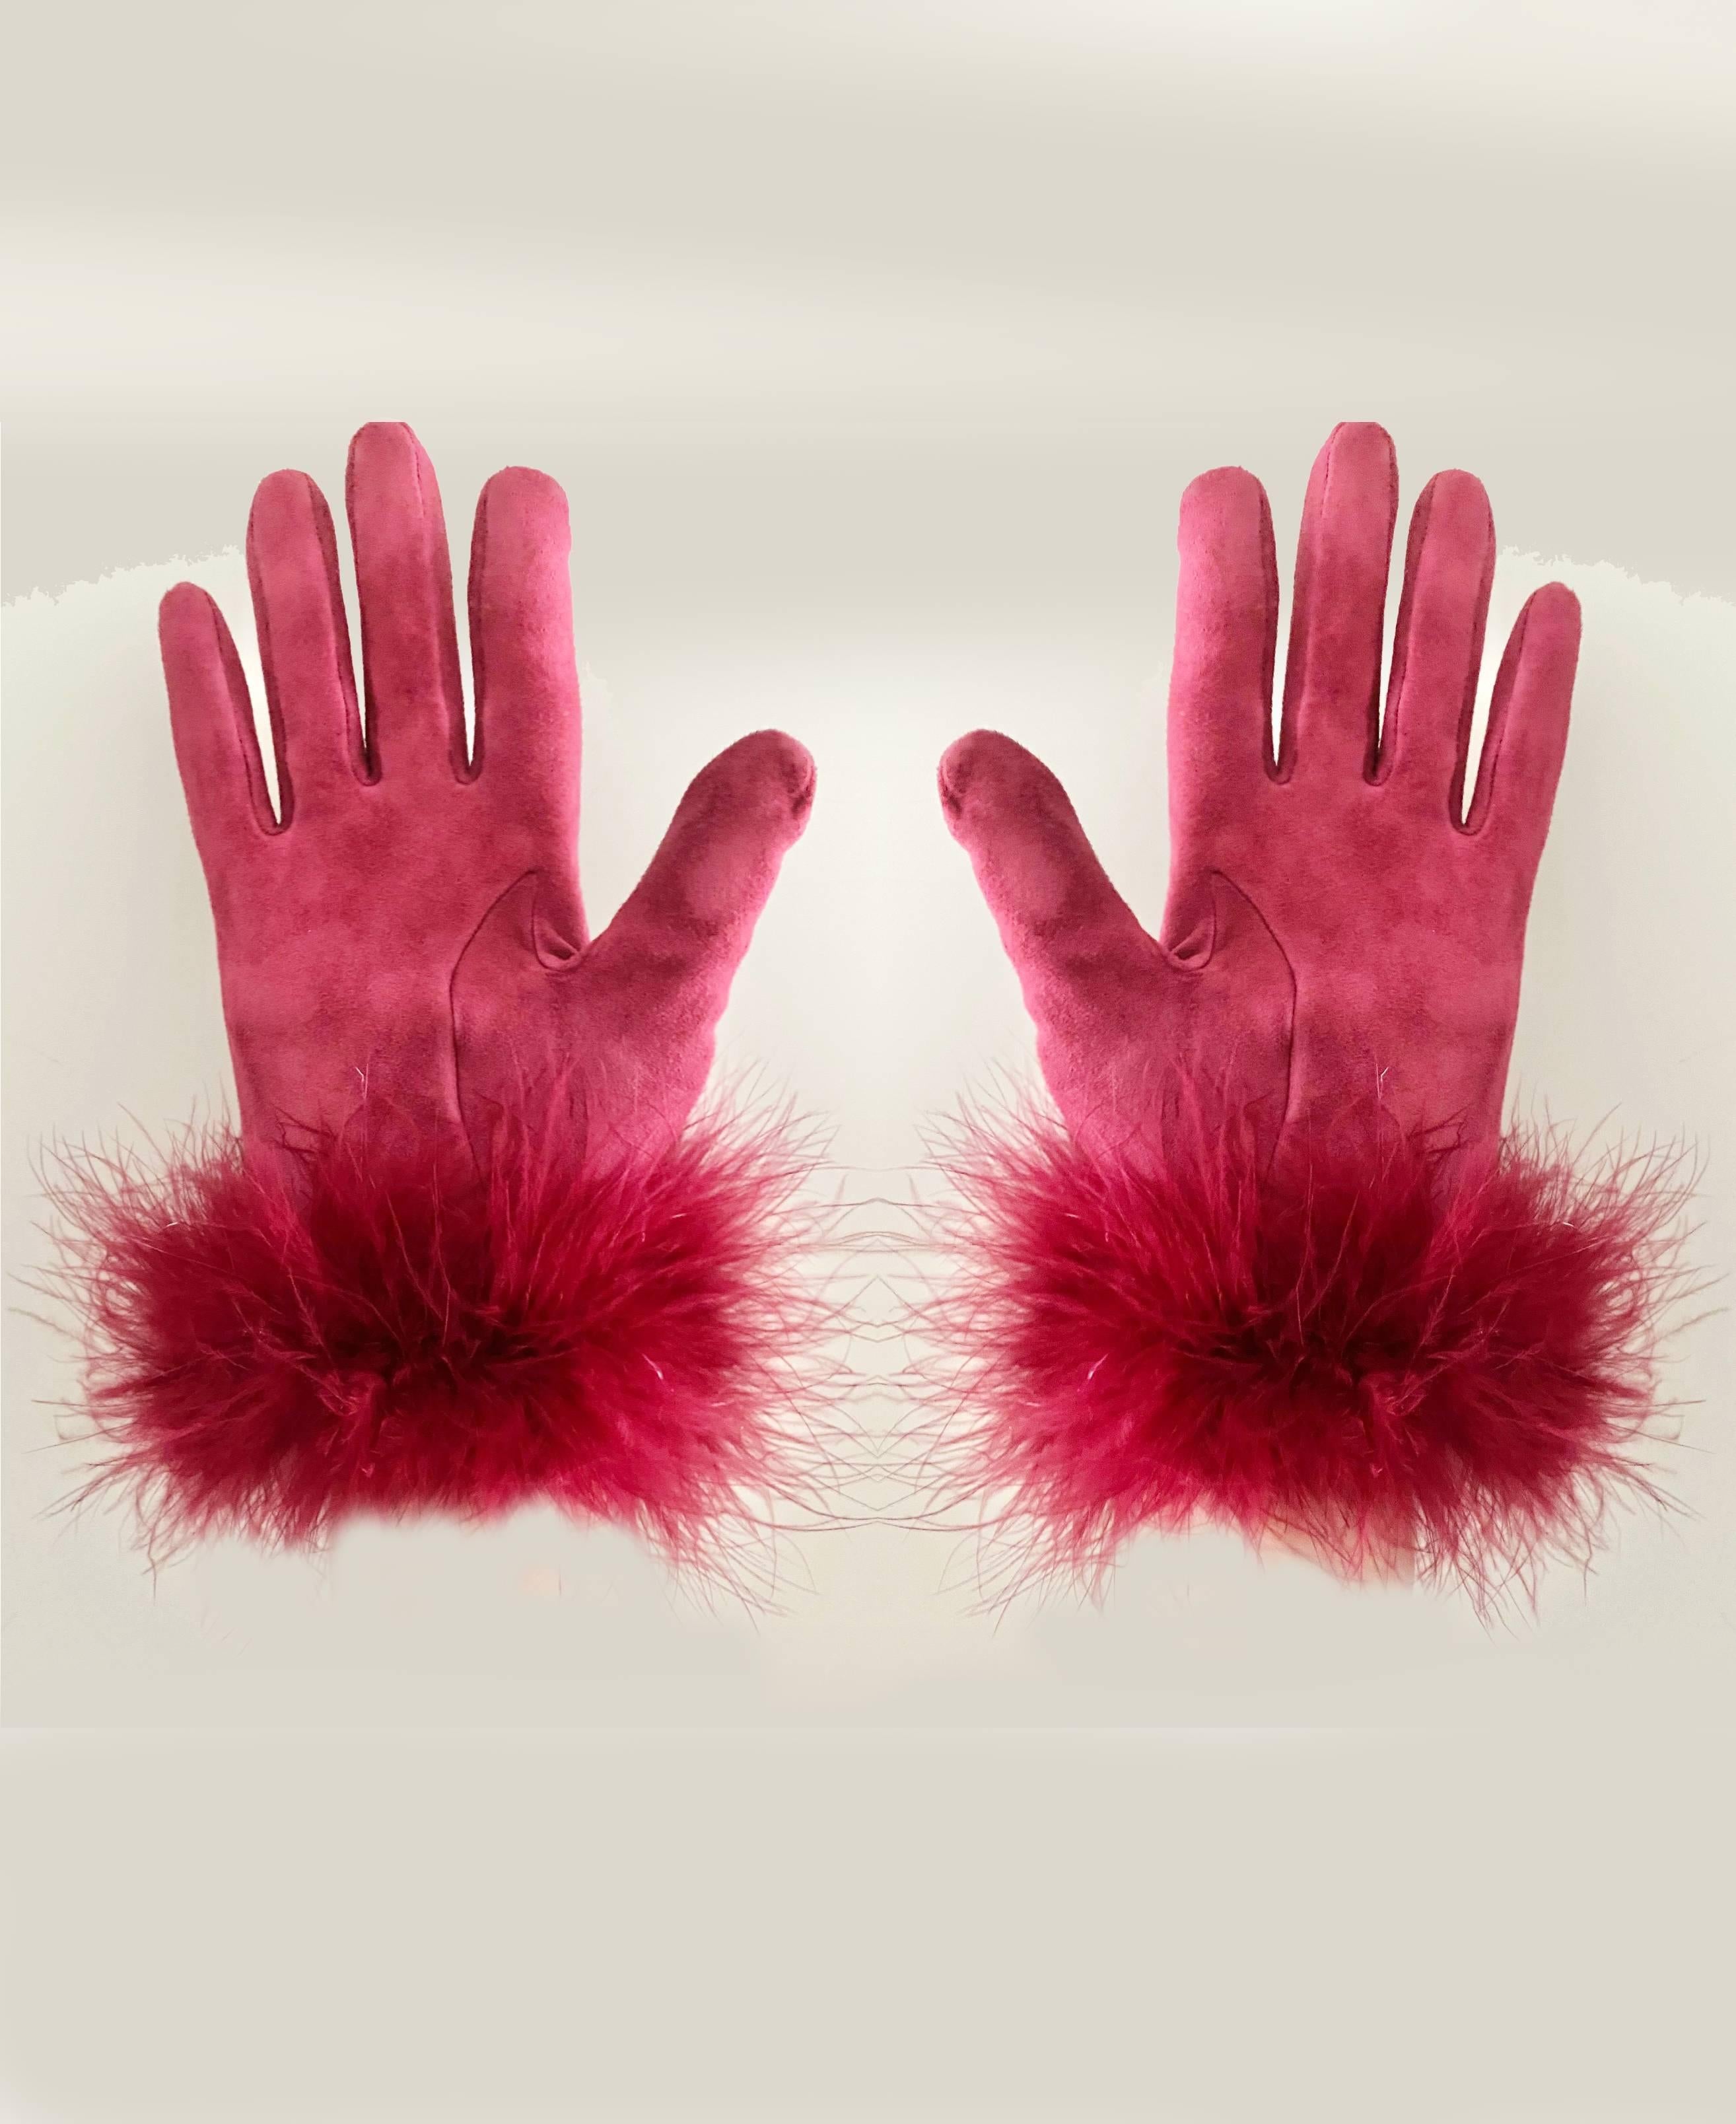 Christian Dior strawberry red suede gloves with feathered fringes, fabric lining , wrist length, light weighted 

Size:  S    
Condition: 1980s / very good vintage 